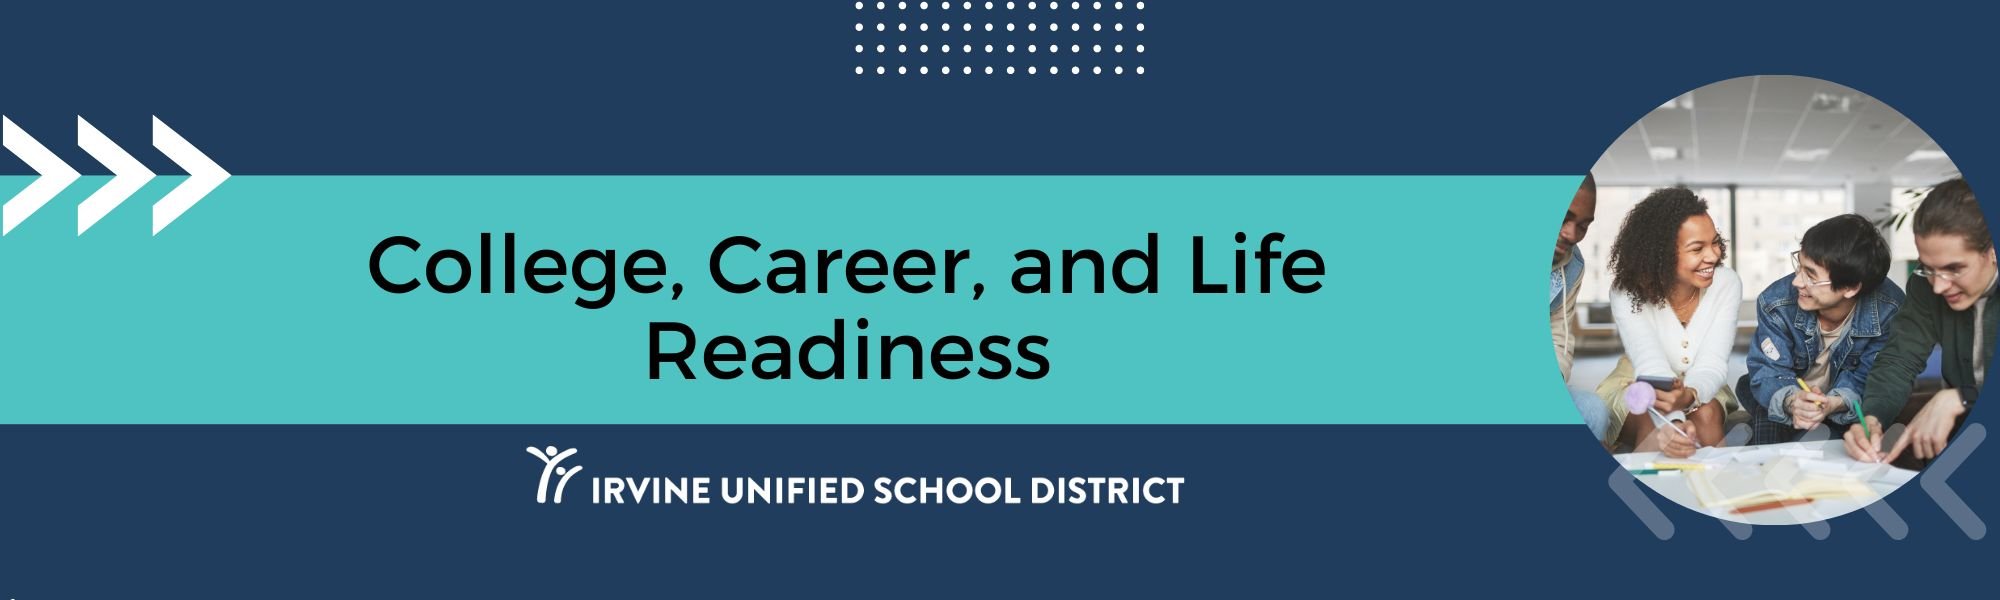 College, Career, and Life Readiness